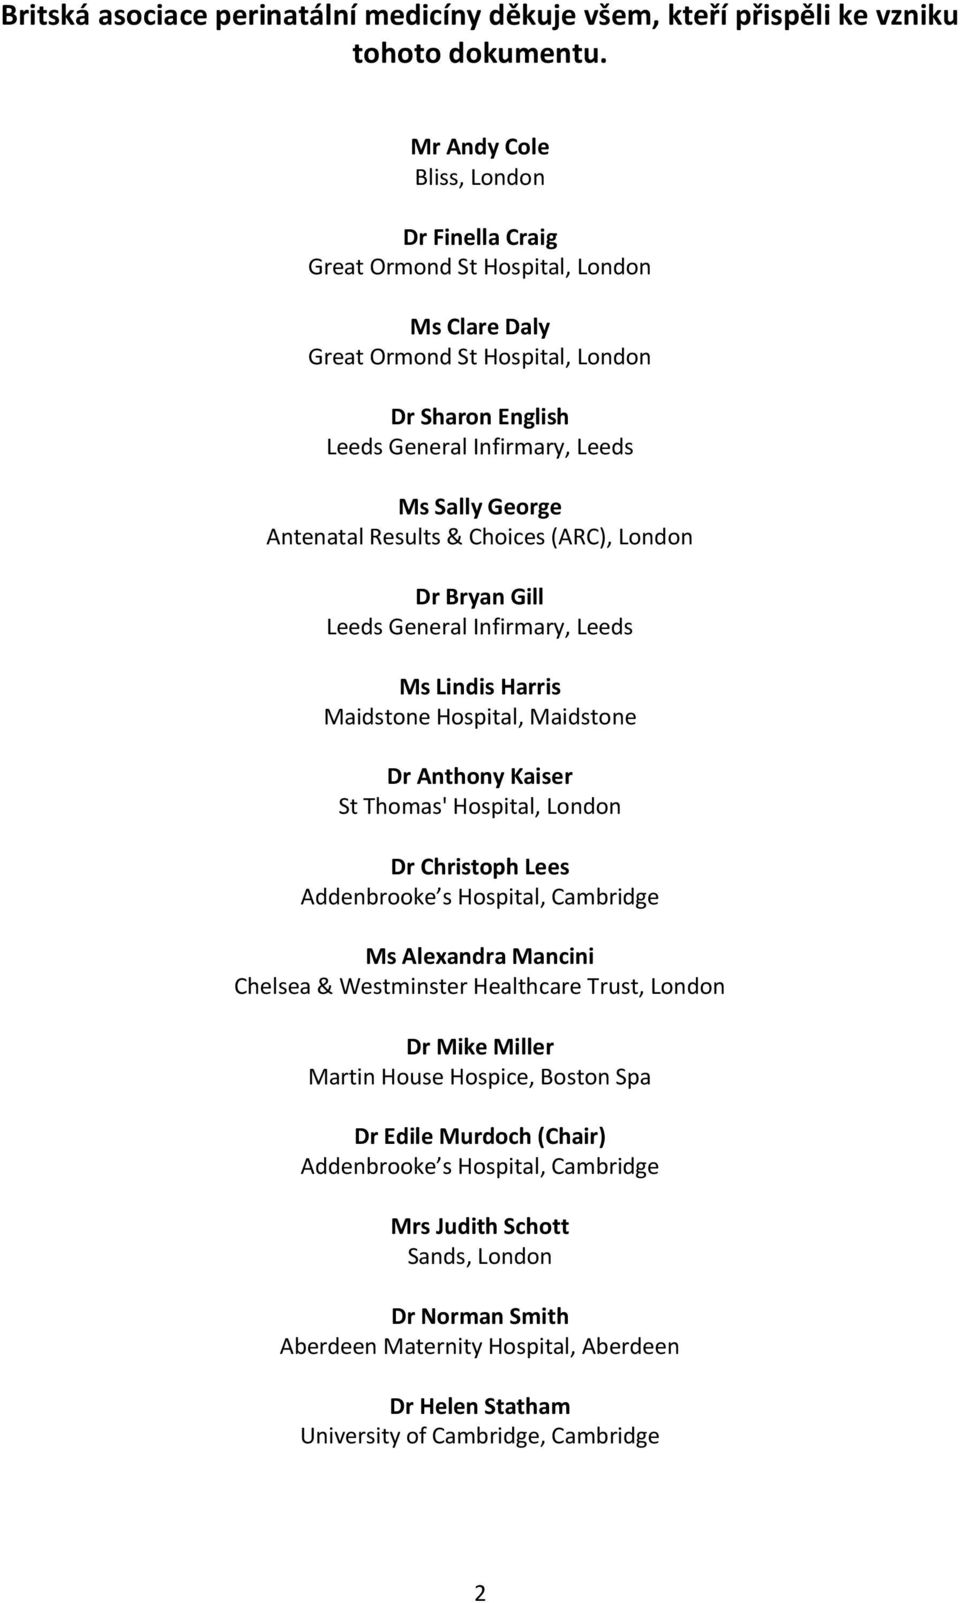 Results & Choices (ARC), London Dr Bryan Gill Leeds General Infirmary, Leeds Ms Lindis Harris Maidstone Hospital, Maidstone Dr Anthony Kaiser St Thomas' Hospital, London Dr Christoph Lees Addenbrooke